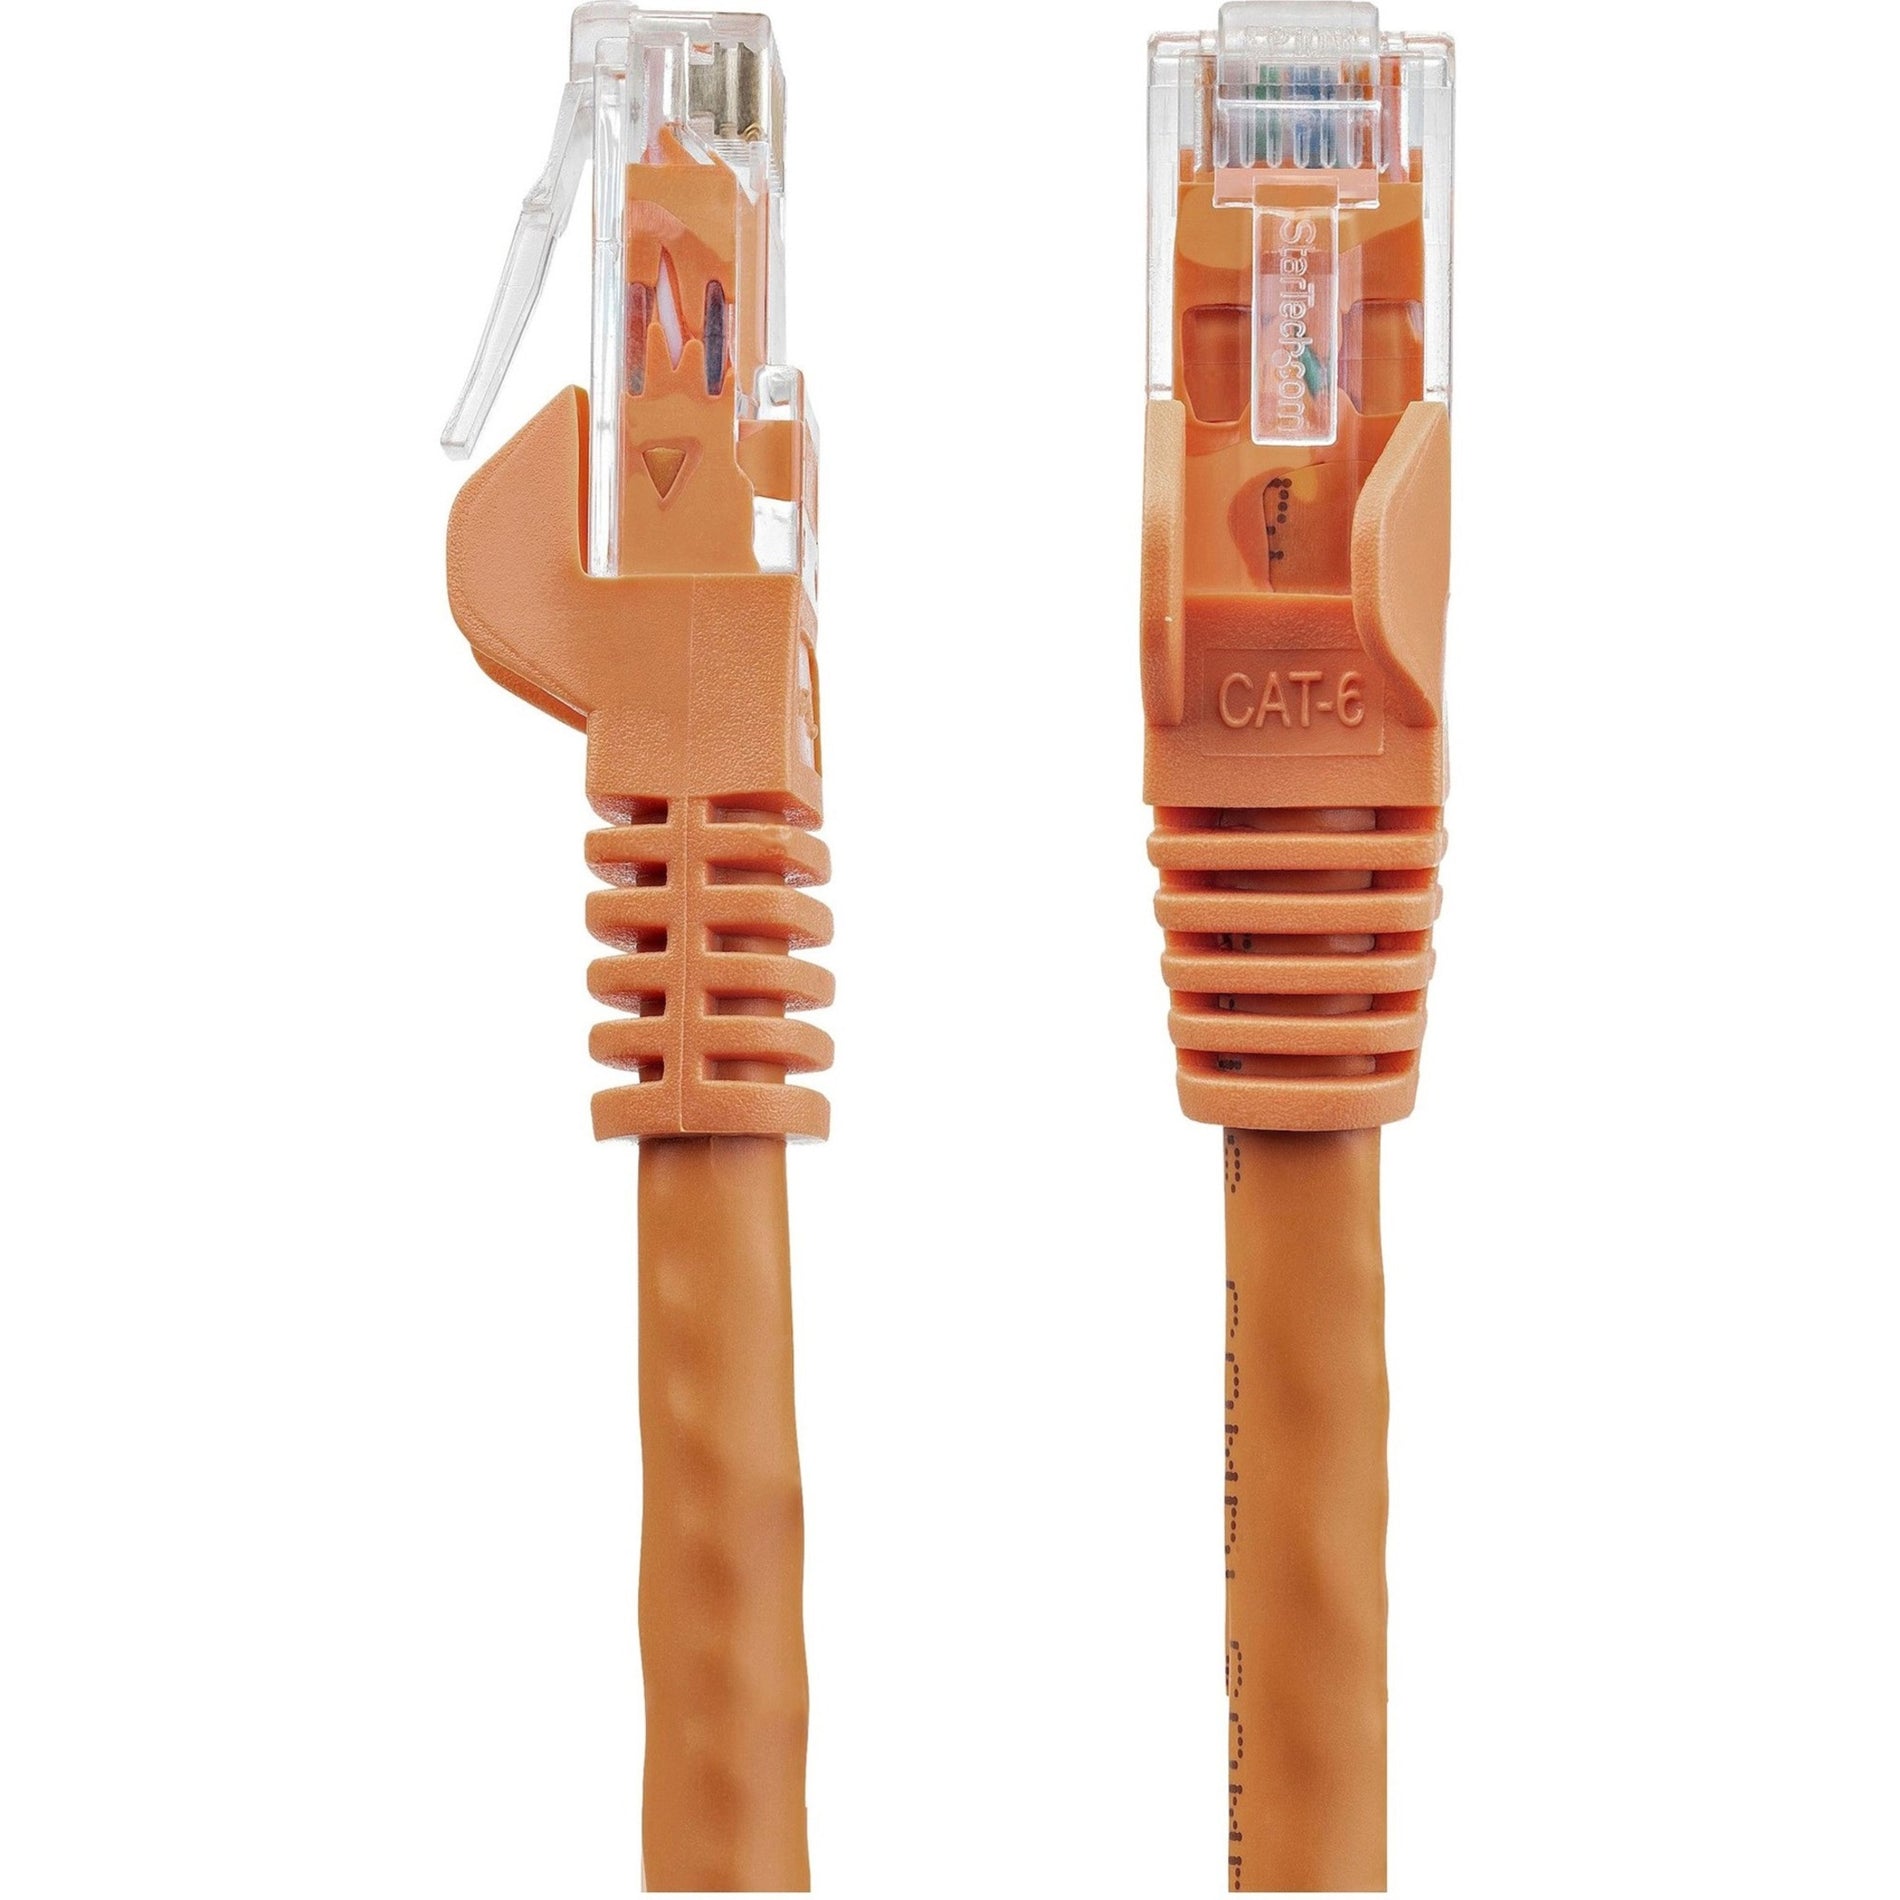 StarTech.com N6PATCH25OR 25 ft Orange Snagless Cat6 UTP Patch Cable, Lifetime Warranty, 10 Gbit/s Data Transfer Rate, RJ45 Connector